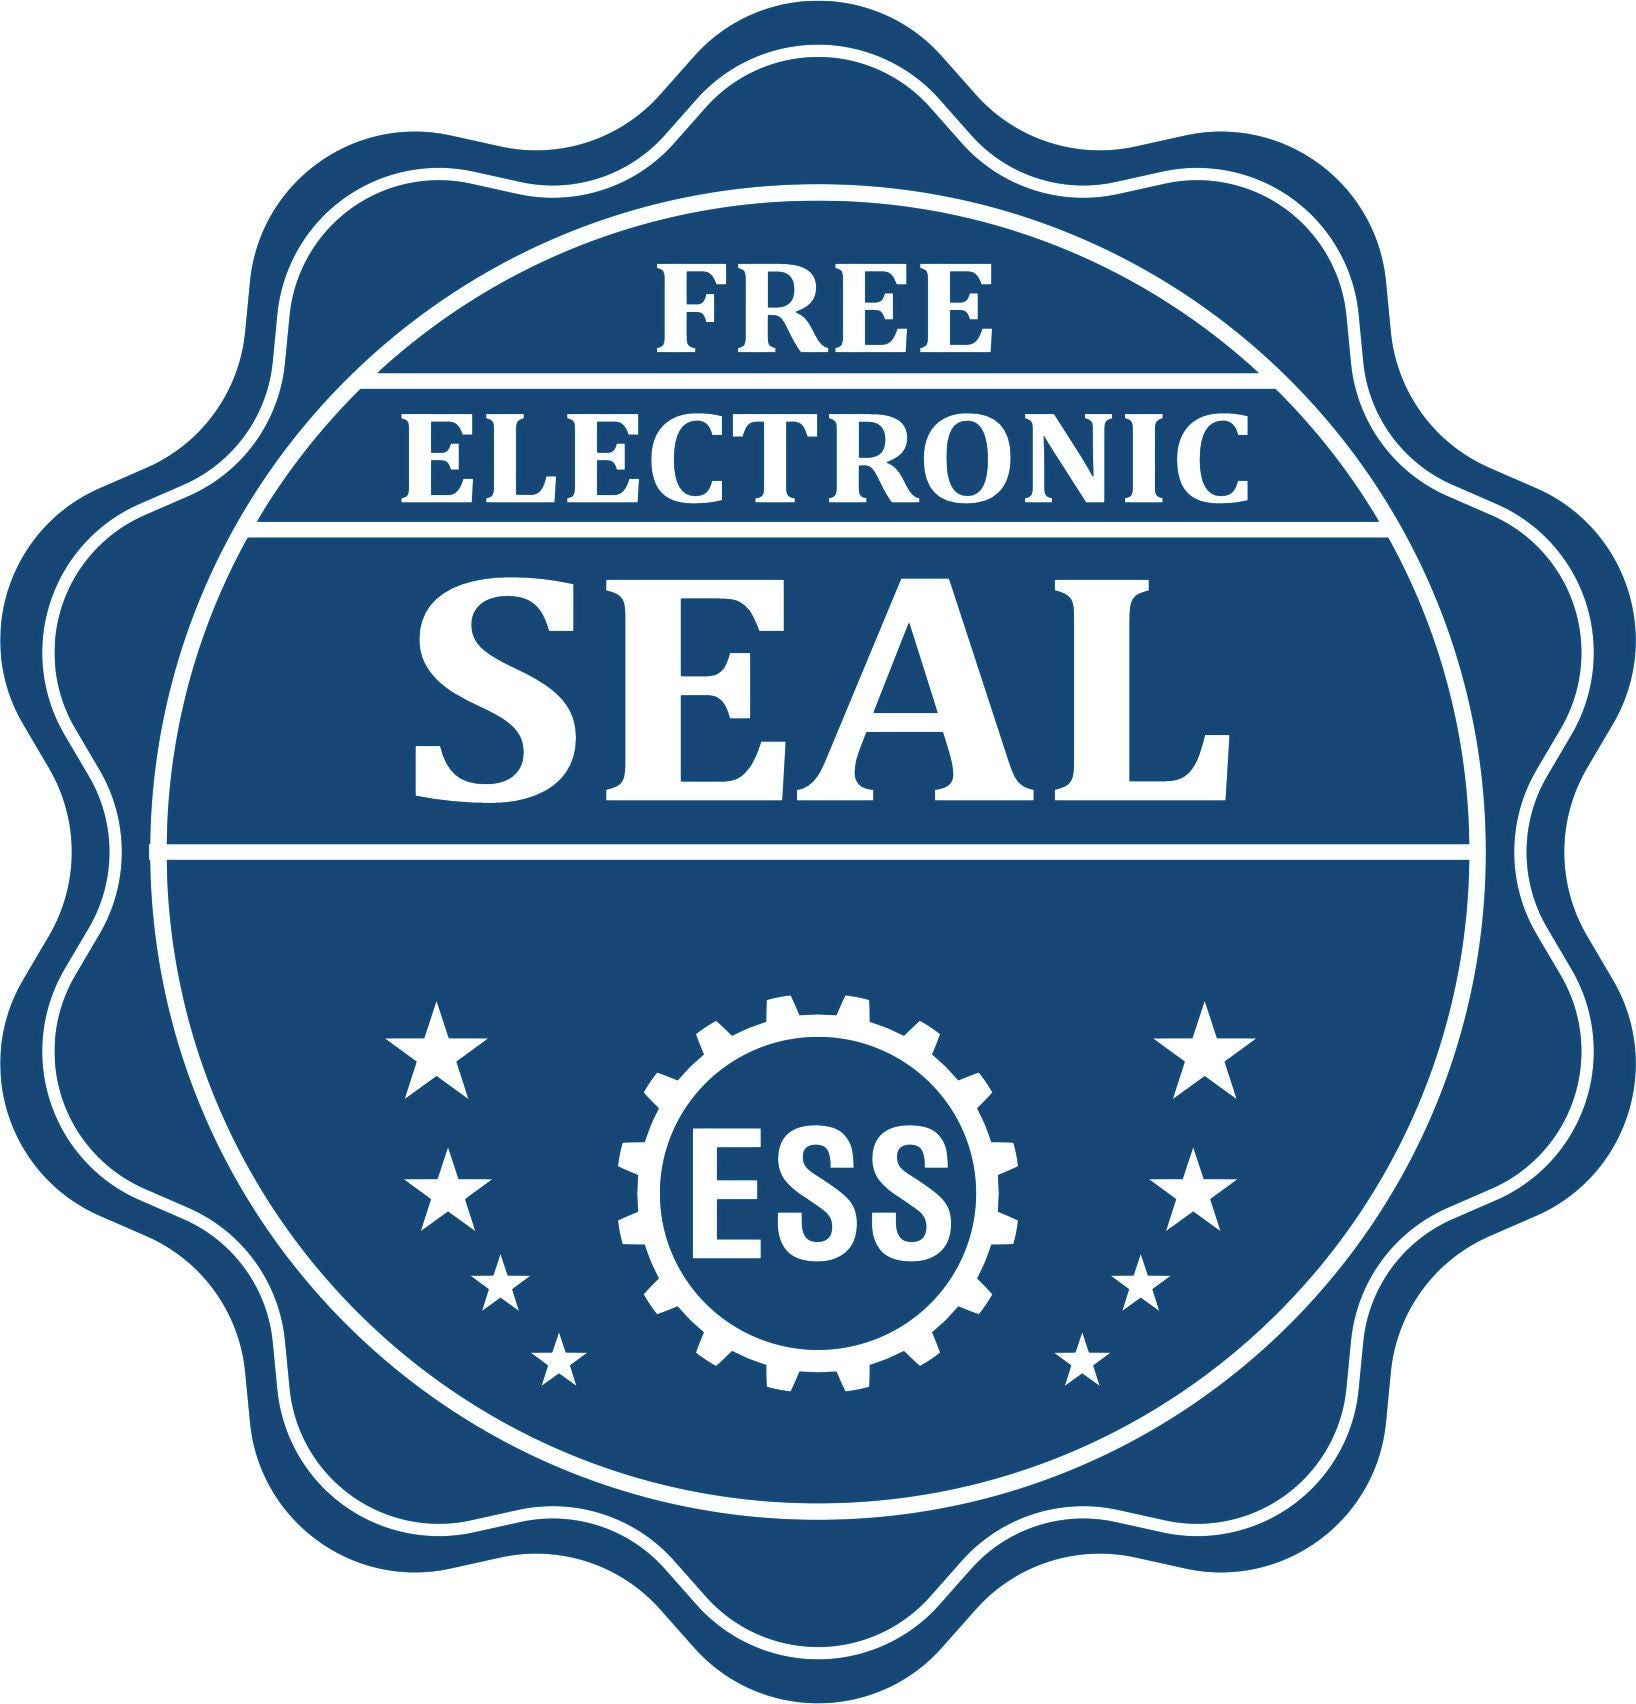 A badge showing a free electronic seal for the Gift Connecticut Engineer Seal with stars and the ESS gear on the emblem.